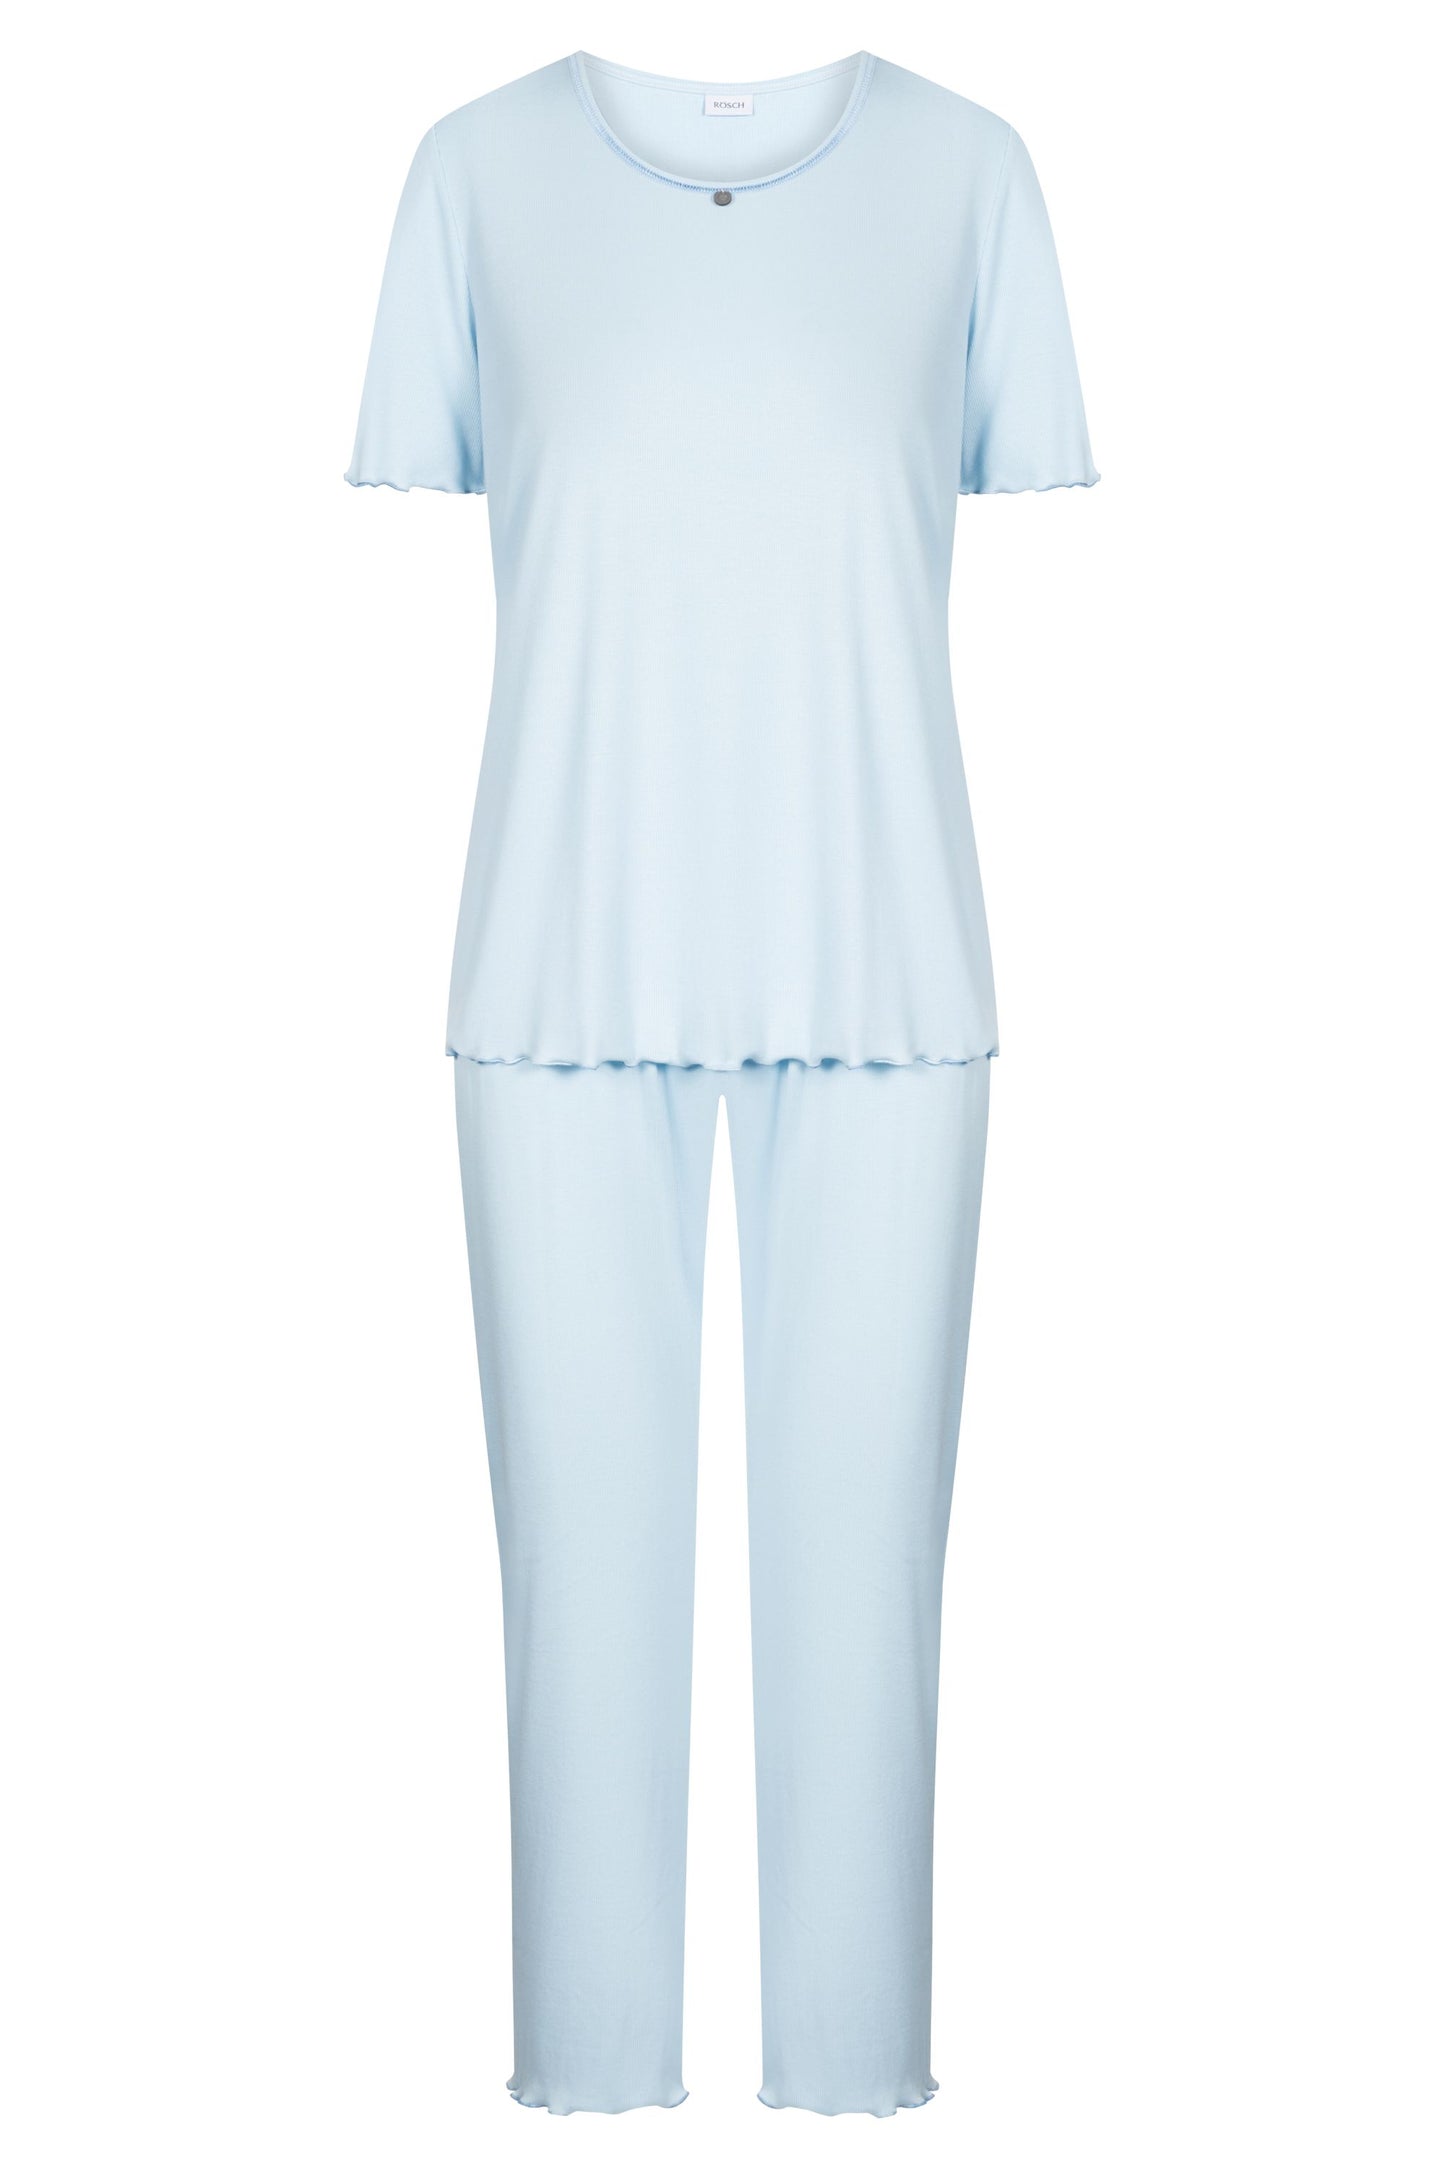 This smart casual pajama set from Rösch is composed of a light, soft, and elastic fine-rib fabric, a combination of cotton and modal that provides breathability, smoothness, and durability. The combination of the two fibers offers superior thermal regulation and superior comfort during sleep, as well as full freedom of movement for a precise fit.